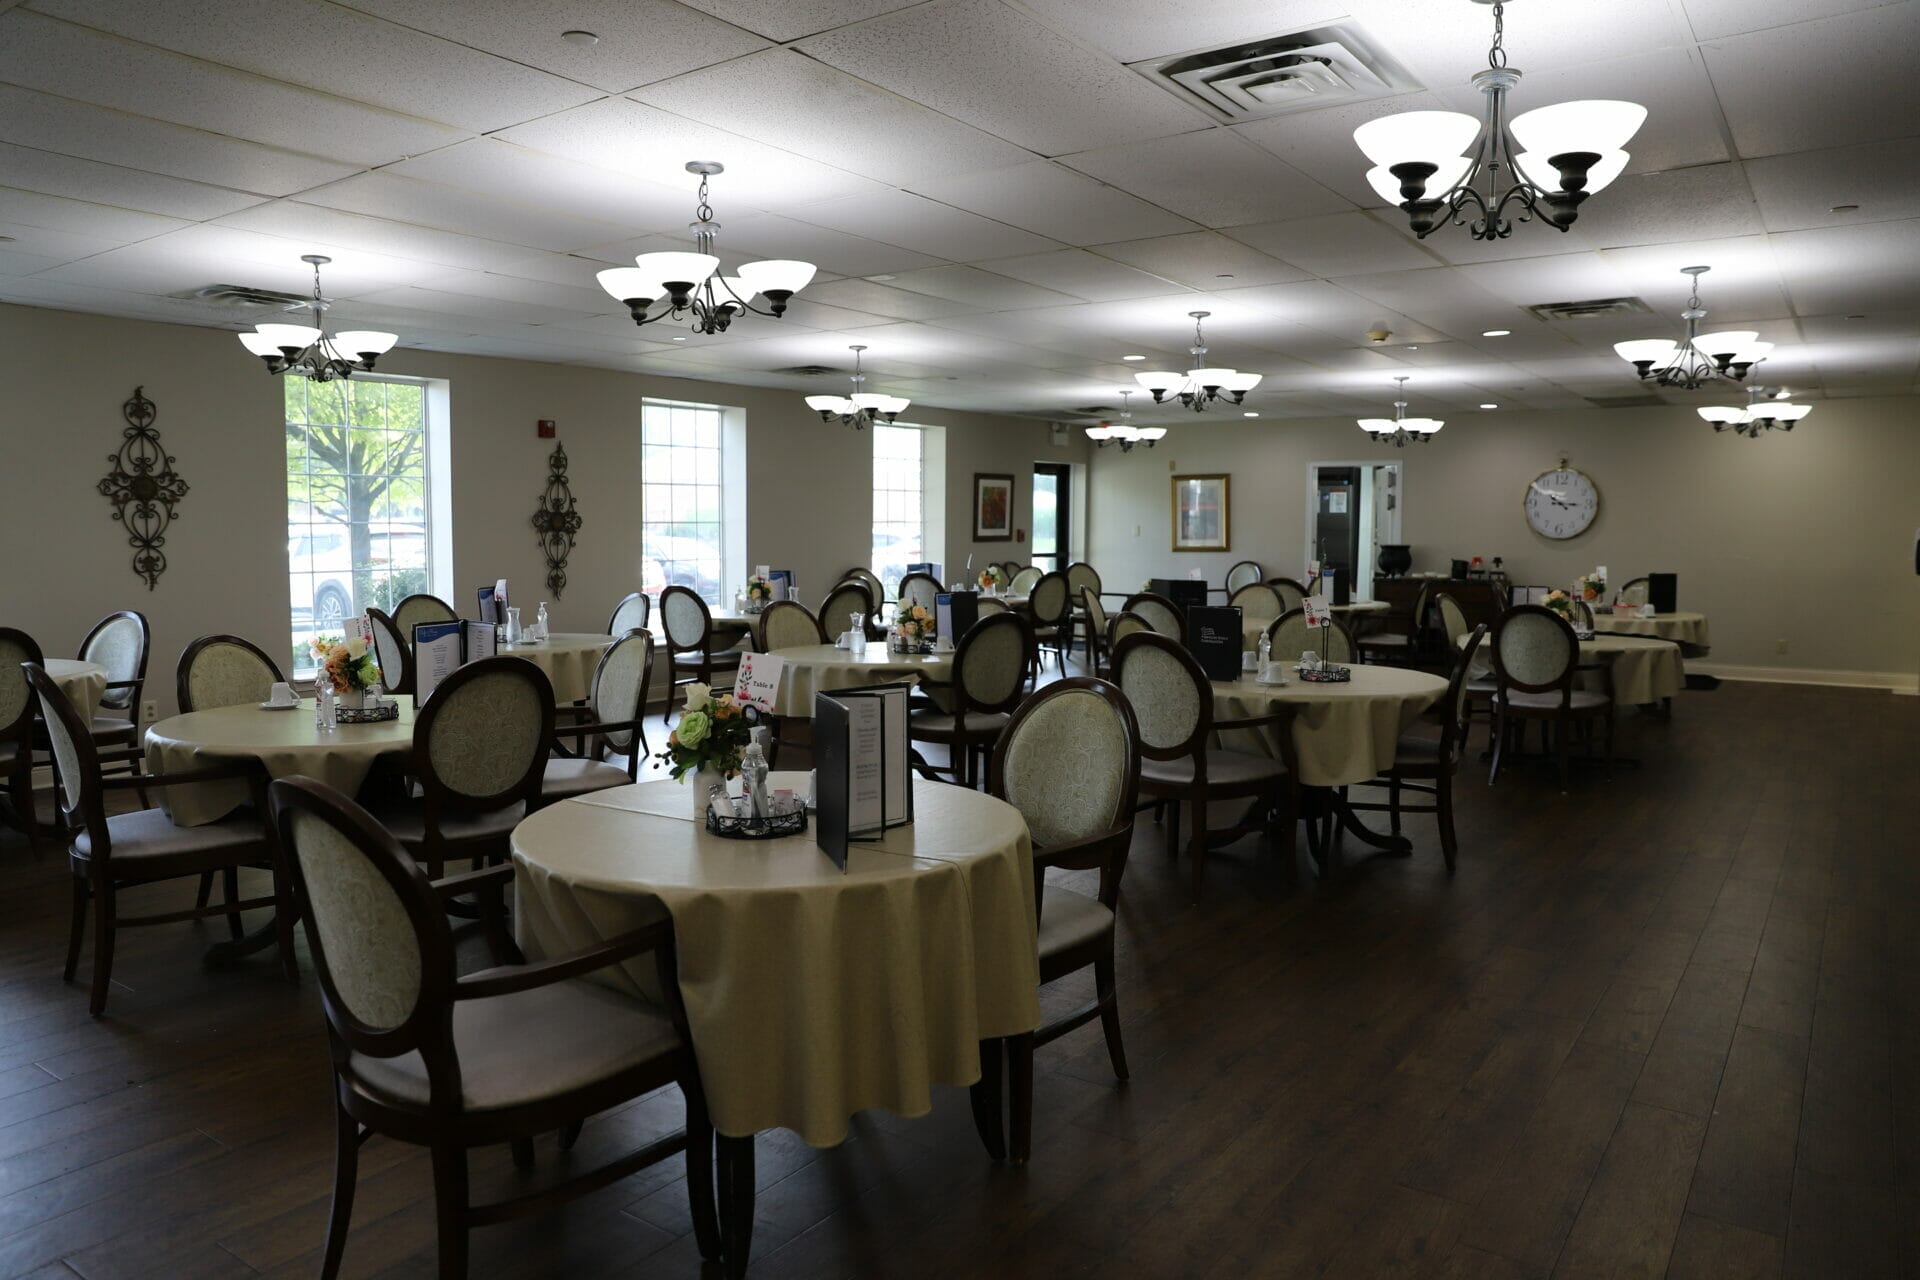 <span  class="uc_style_uc_tiles_grid_image_elementor_uc_items_attribute_title" style="color:#000000;">RW AL DiningRoom IMG 2642</span>